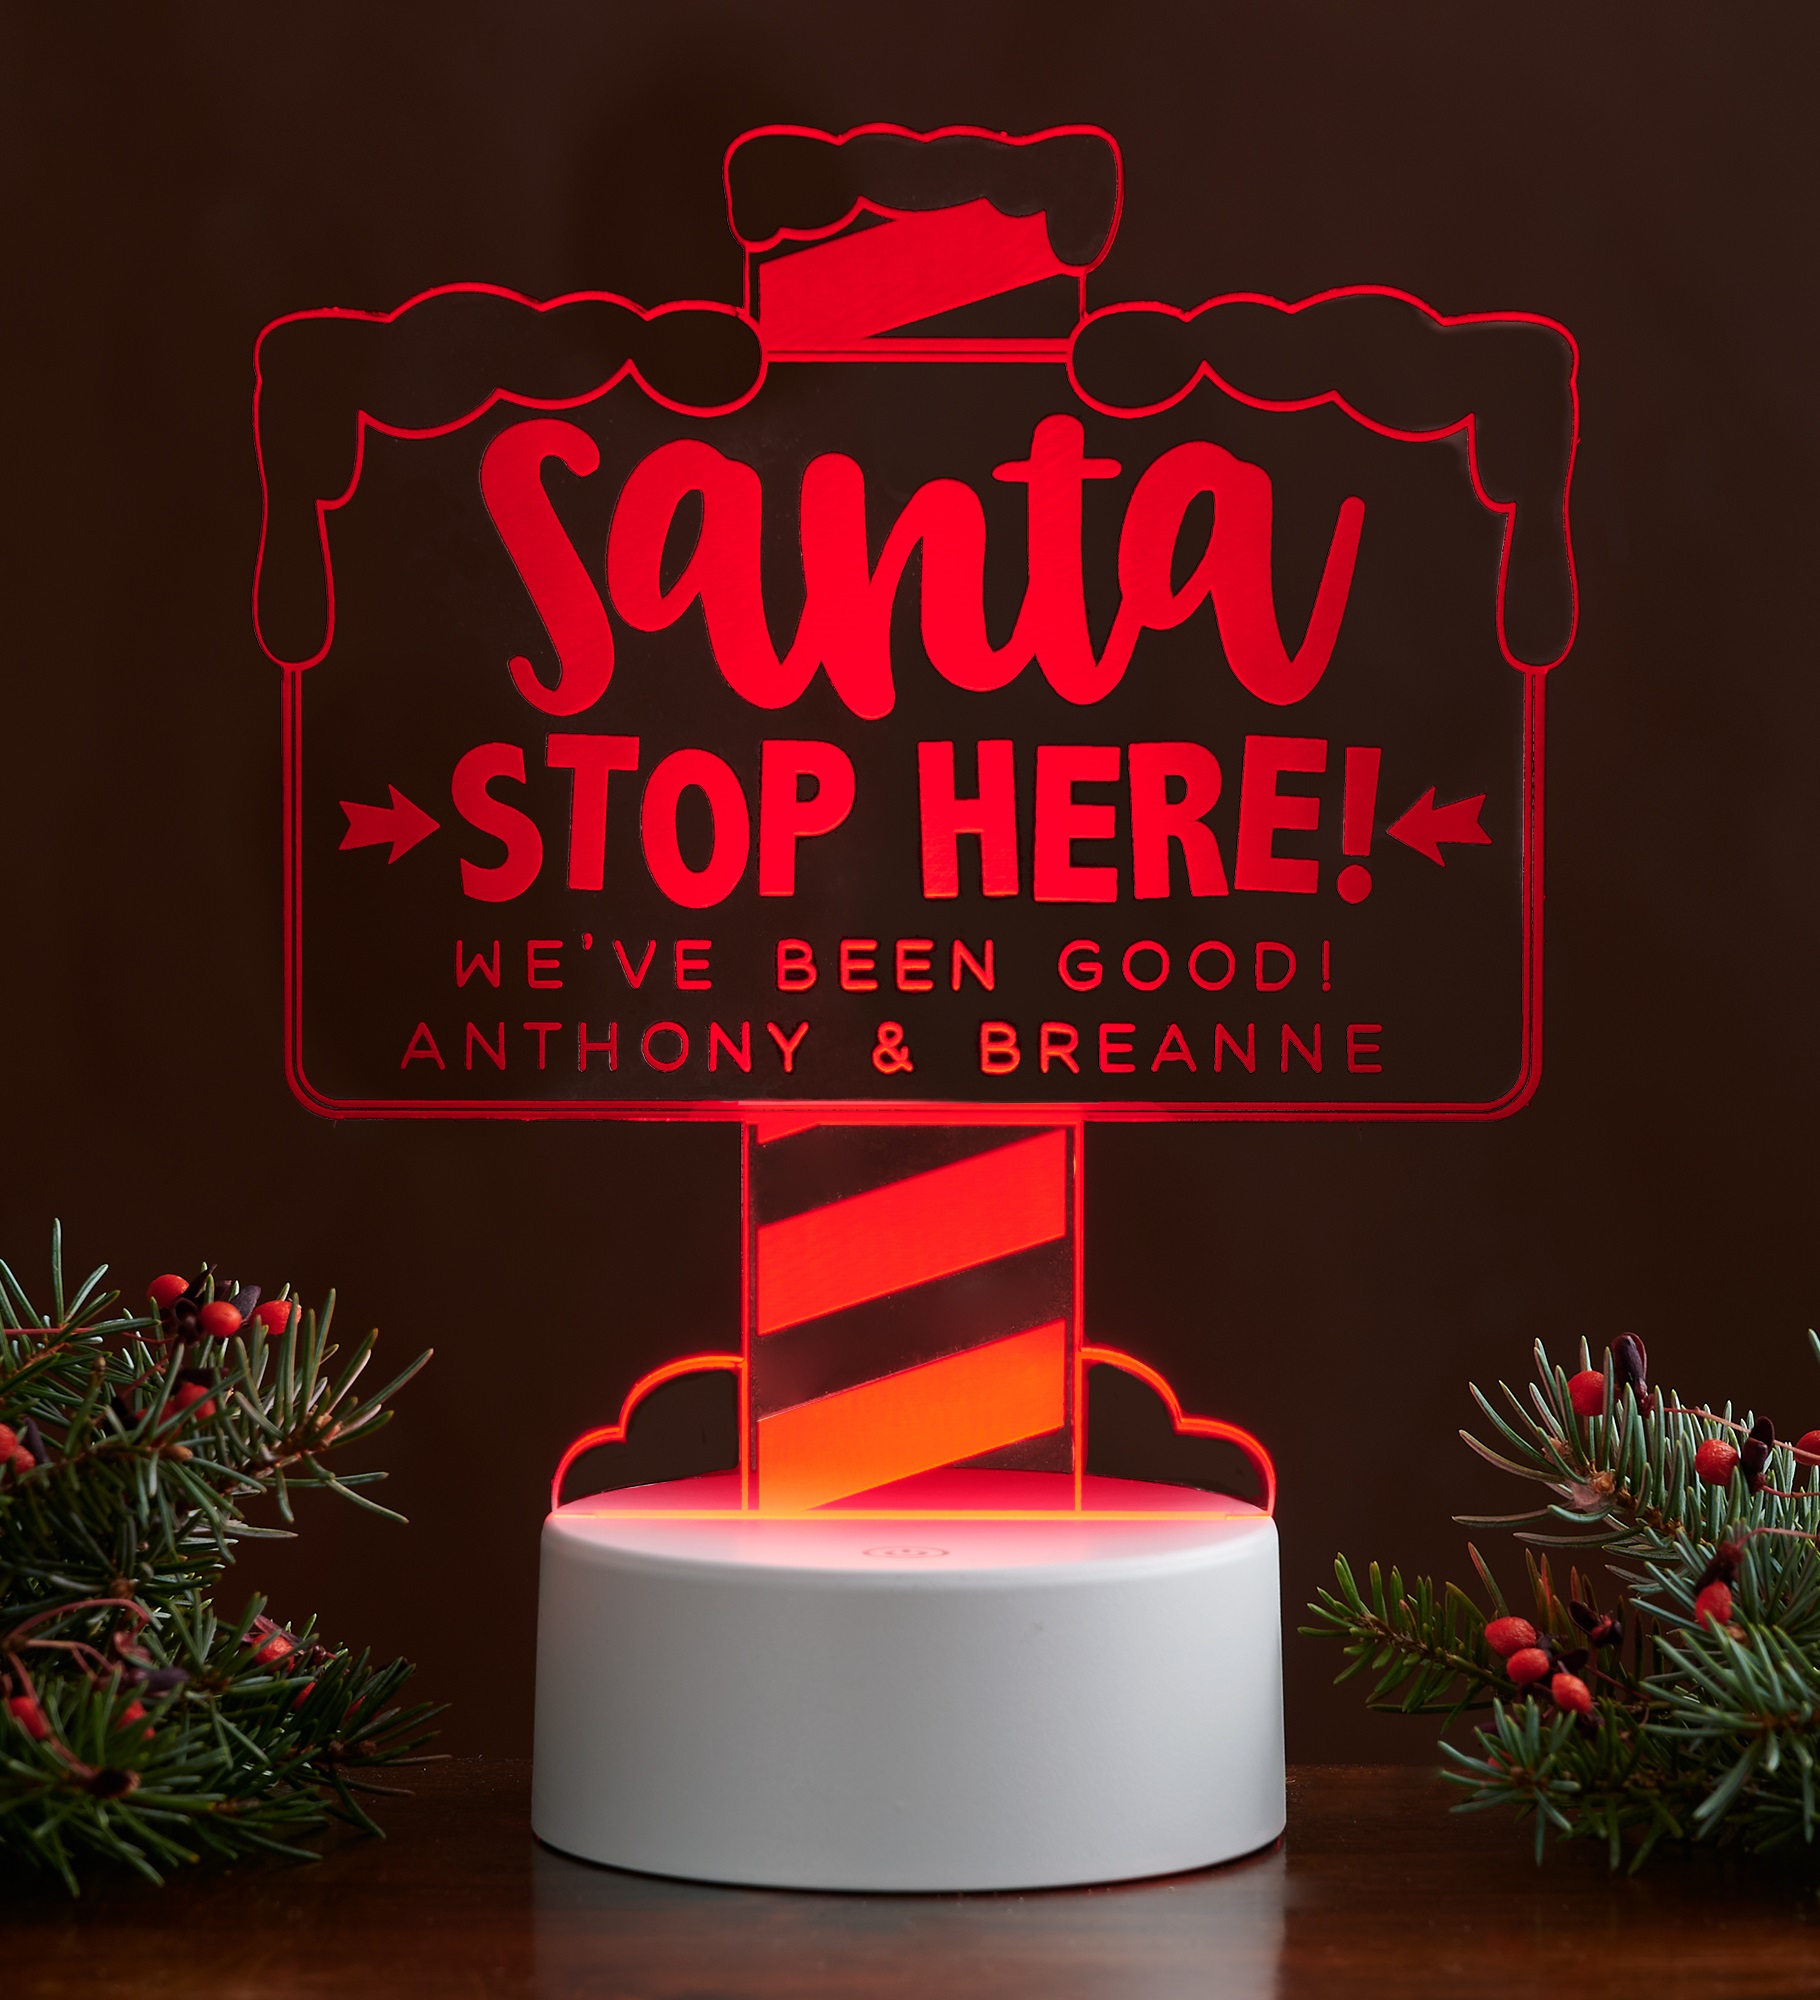 Santa Stop Here Personalized LED Sign